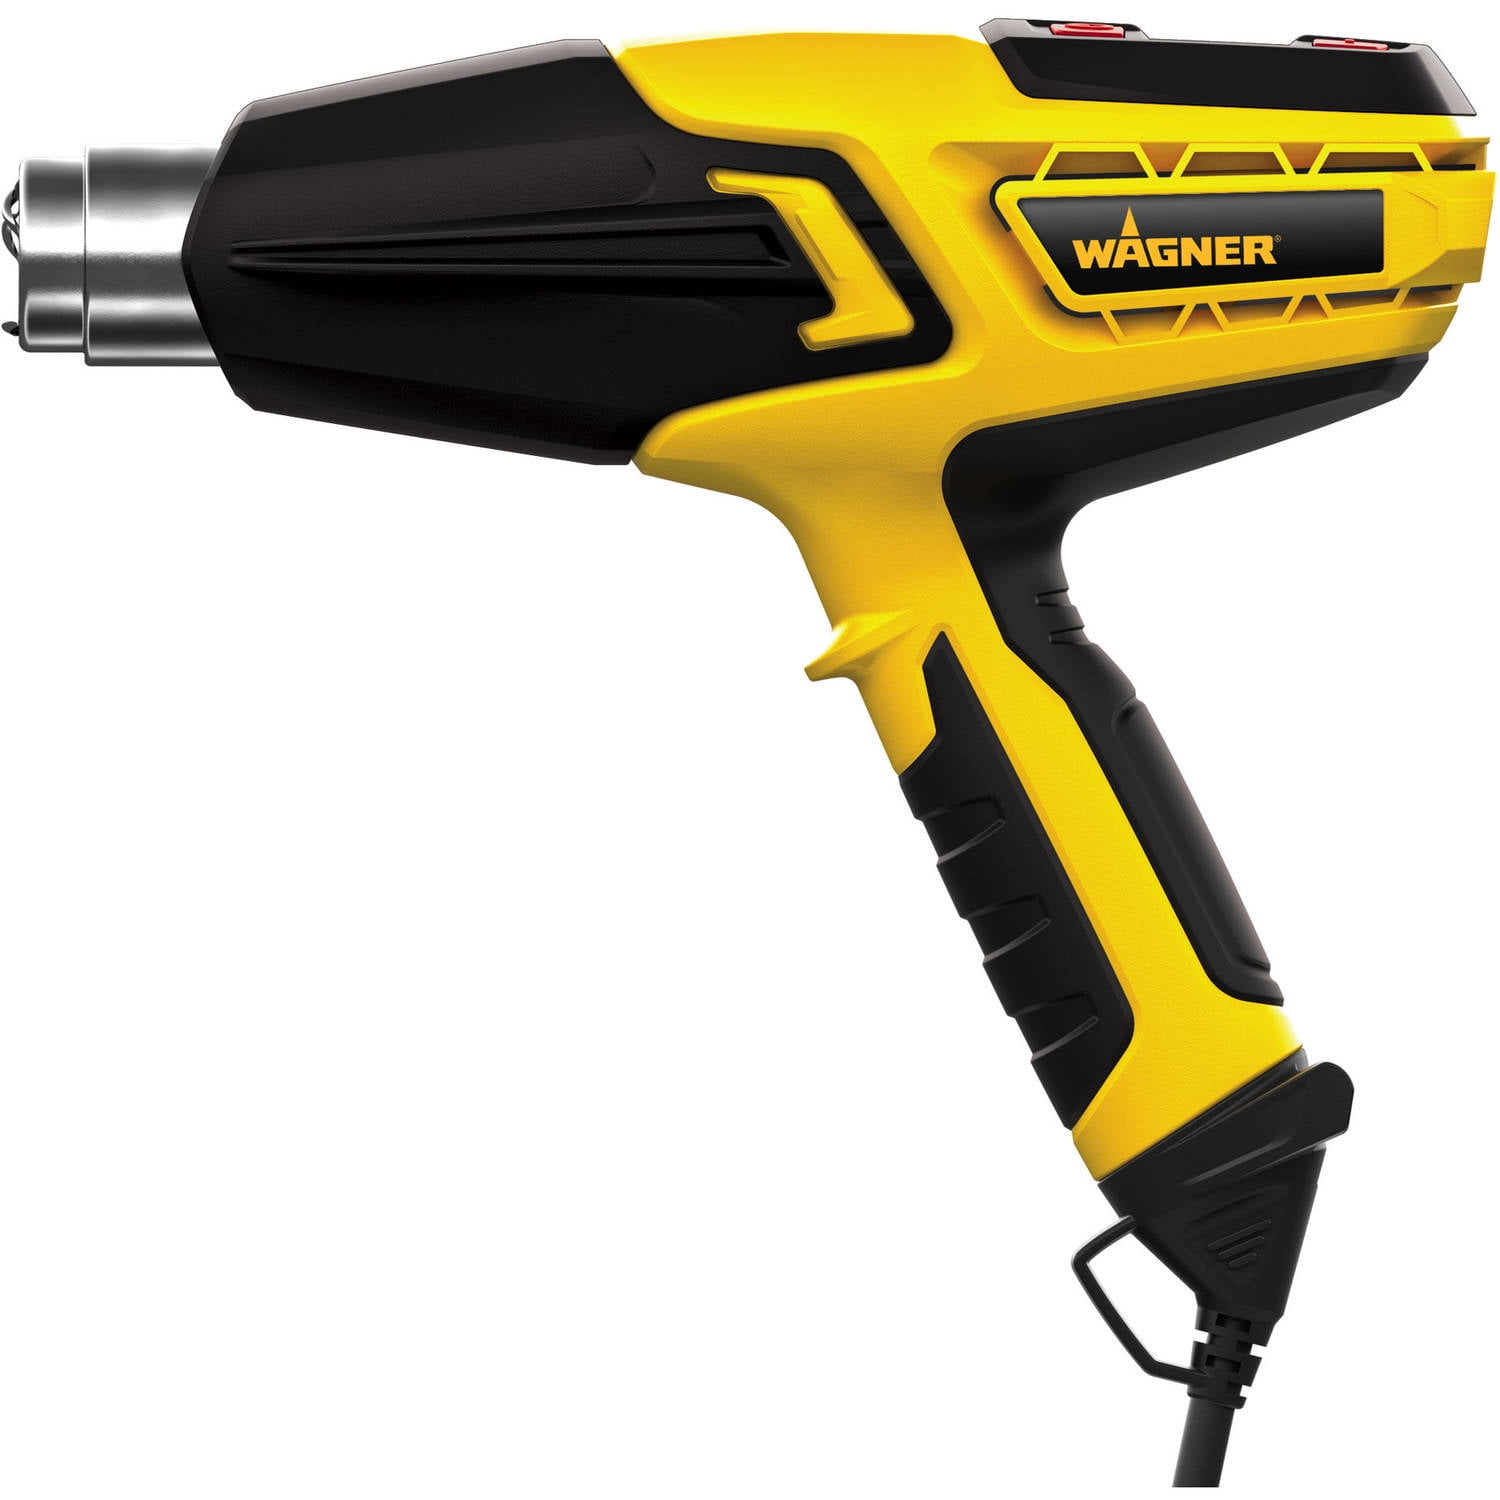 Wagner Furno 750 Variable Tempurature Corded Heat Gun with LCD Display  0503064 - The Home Depot